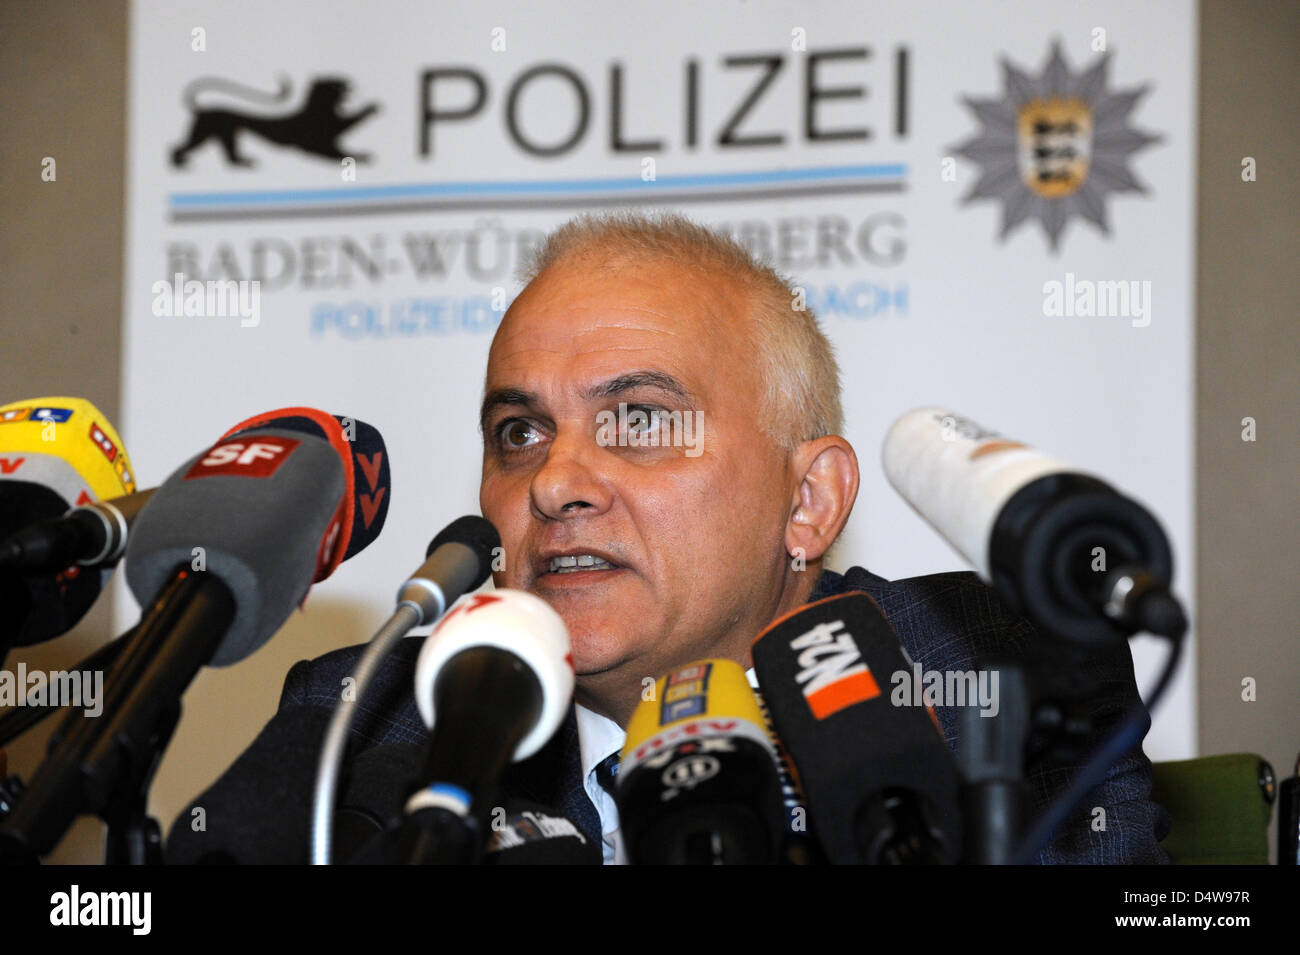 Regional attourney general Uwe Schlosser during a press conference in Loerrach, Germany, 20 September 2010. The previous night, a woman killed her ex-partner and their five-year-old son with explosives at their apartment before entering the nearby hospital, where she shot and killed an employee and wounded several others. She was then shot and killed by police officers. Photo: PATR Stock Photo